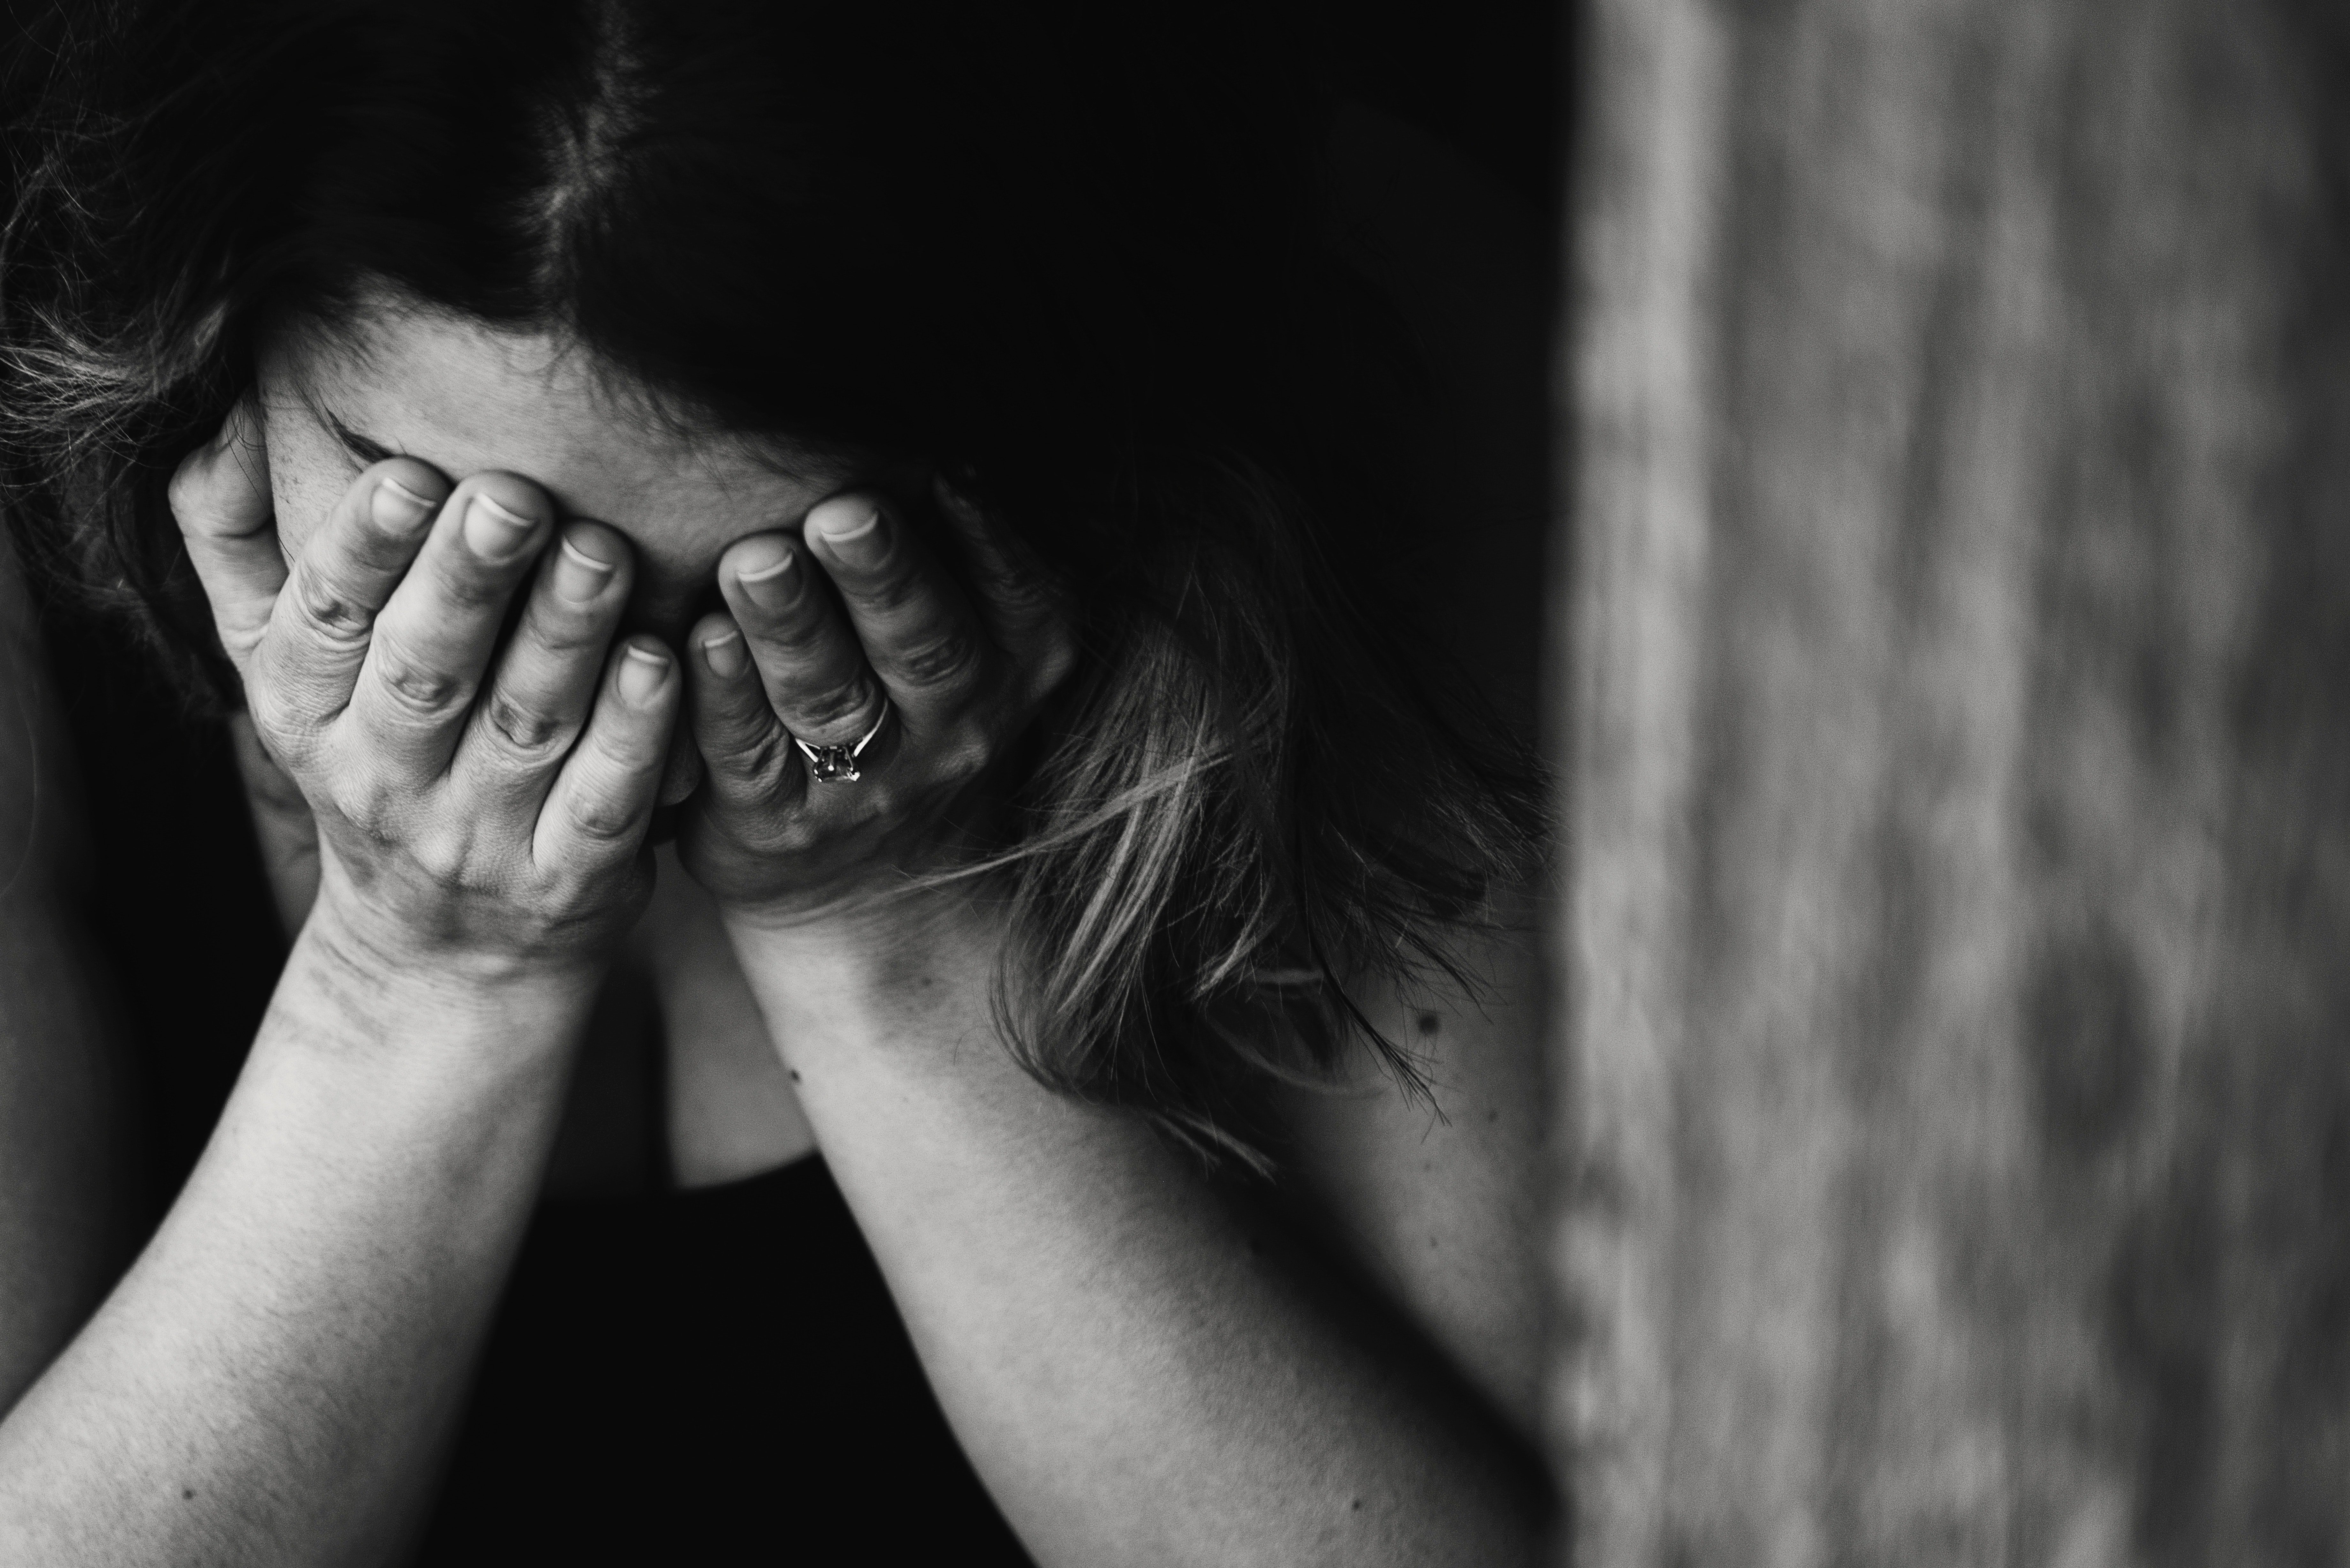 OP was shattered by her daughter's ignorance | Source: Pexels